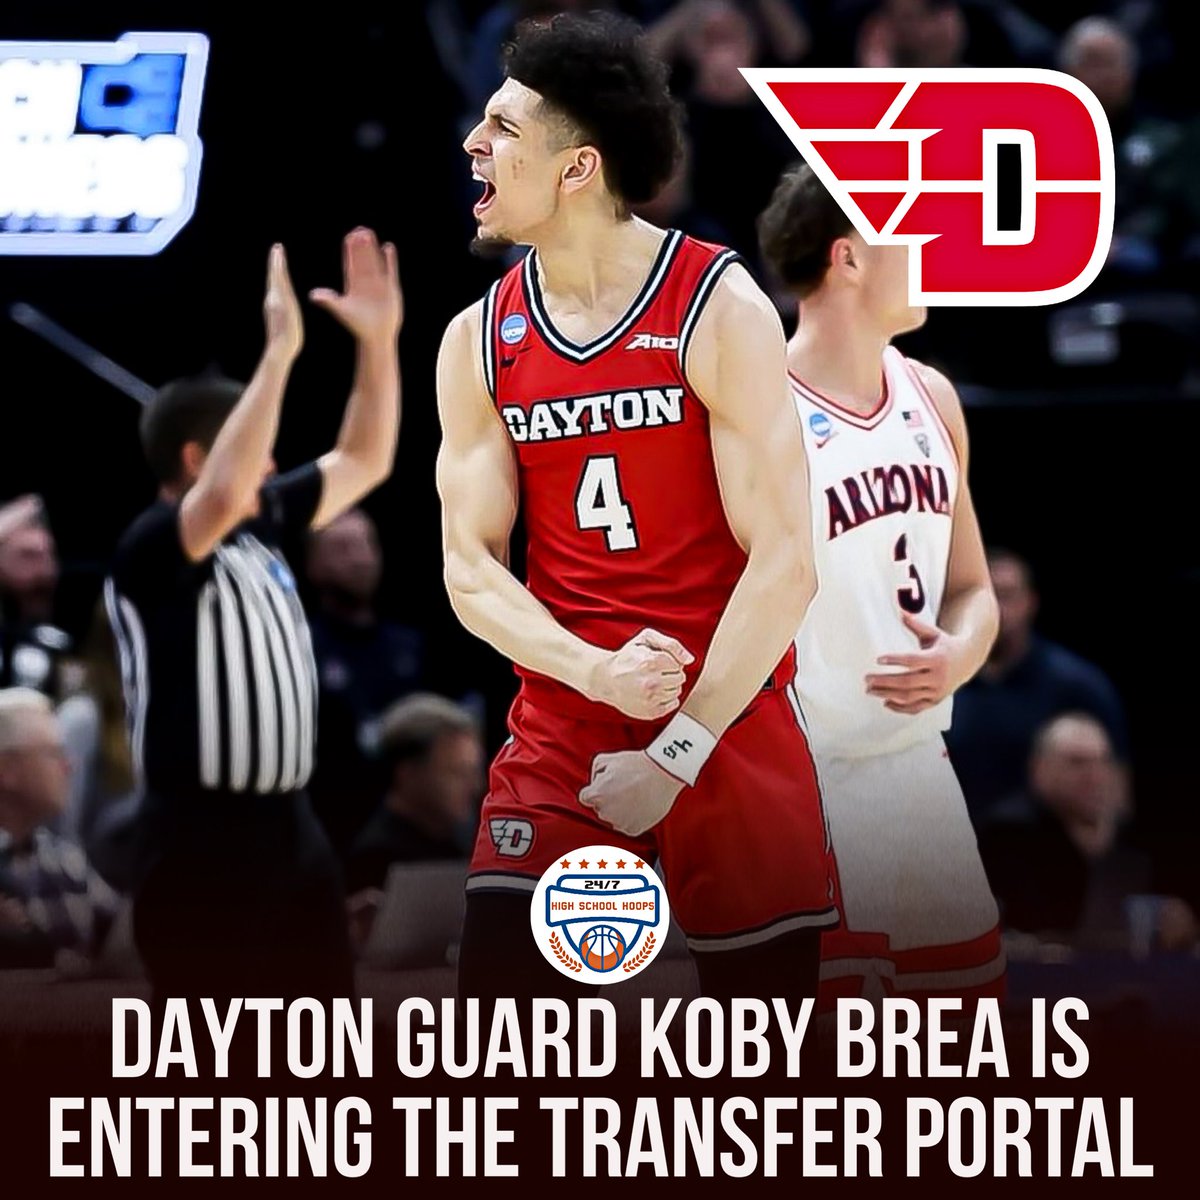 NEWS: Dayton guard Koby Brea is entering the transfer portal, per source. Brea is a native of Washington Heights, New York who has spent the last four seasons at Dayton. He averaged 11.1PPG, 3.8RPG and 1.2APG this season. Shot 49.8% from 3.